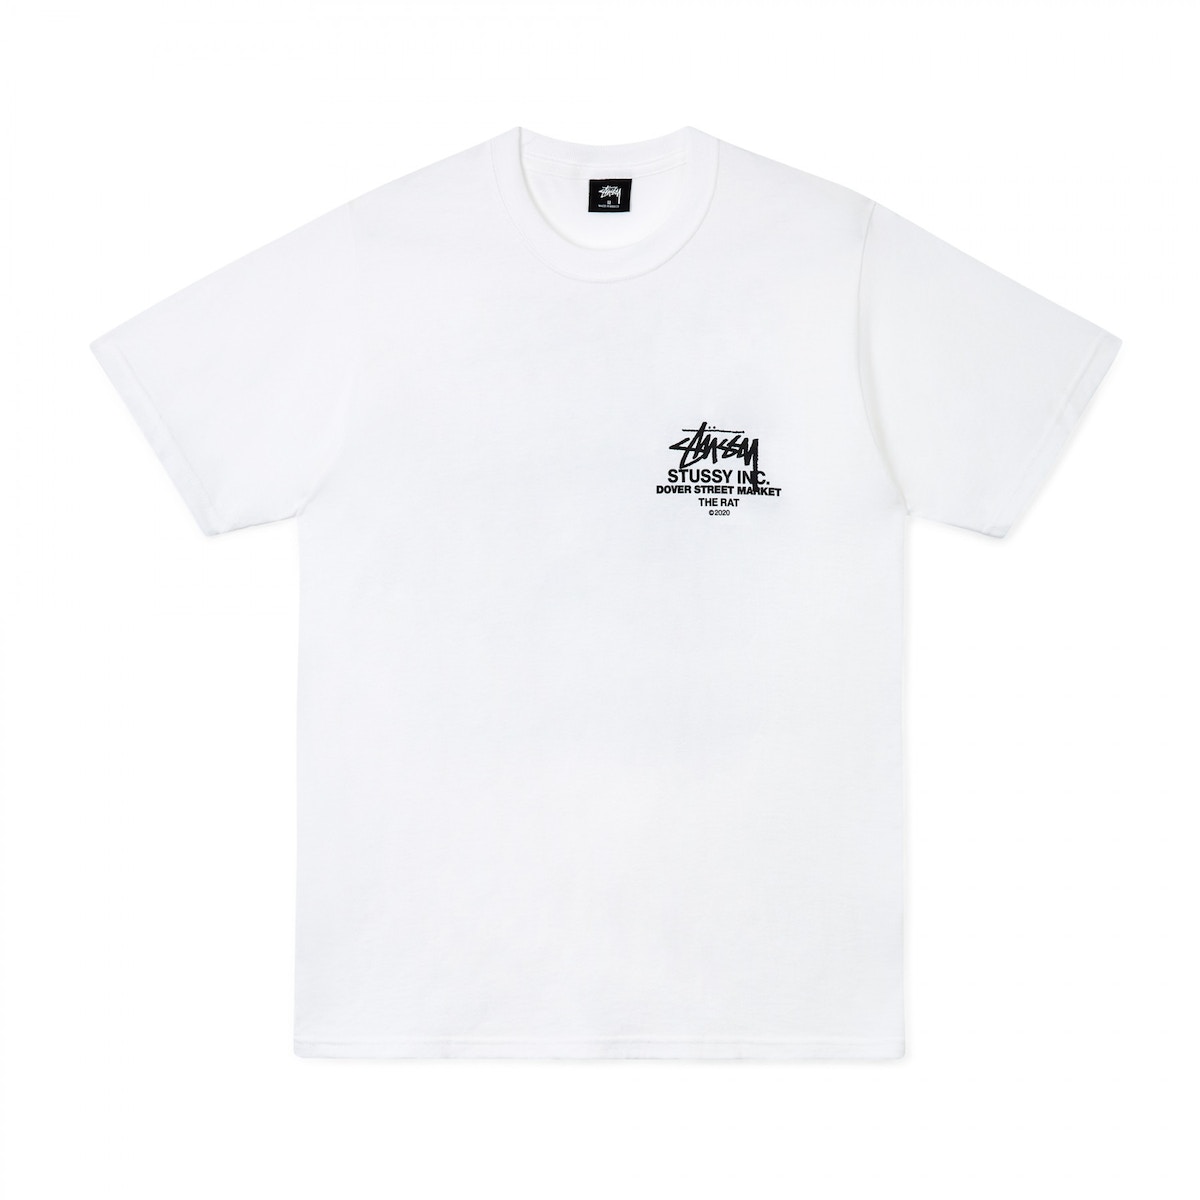 Stussy x Dover Street Market Year of the Rat T-Shirt White - SS20